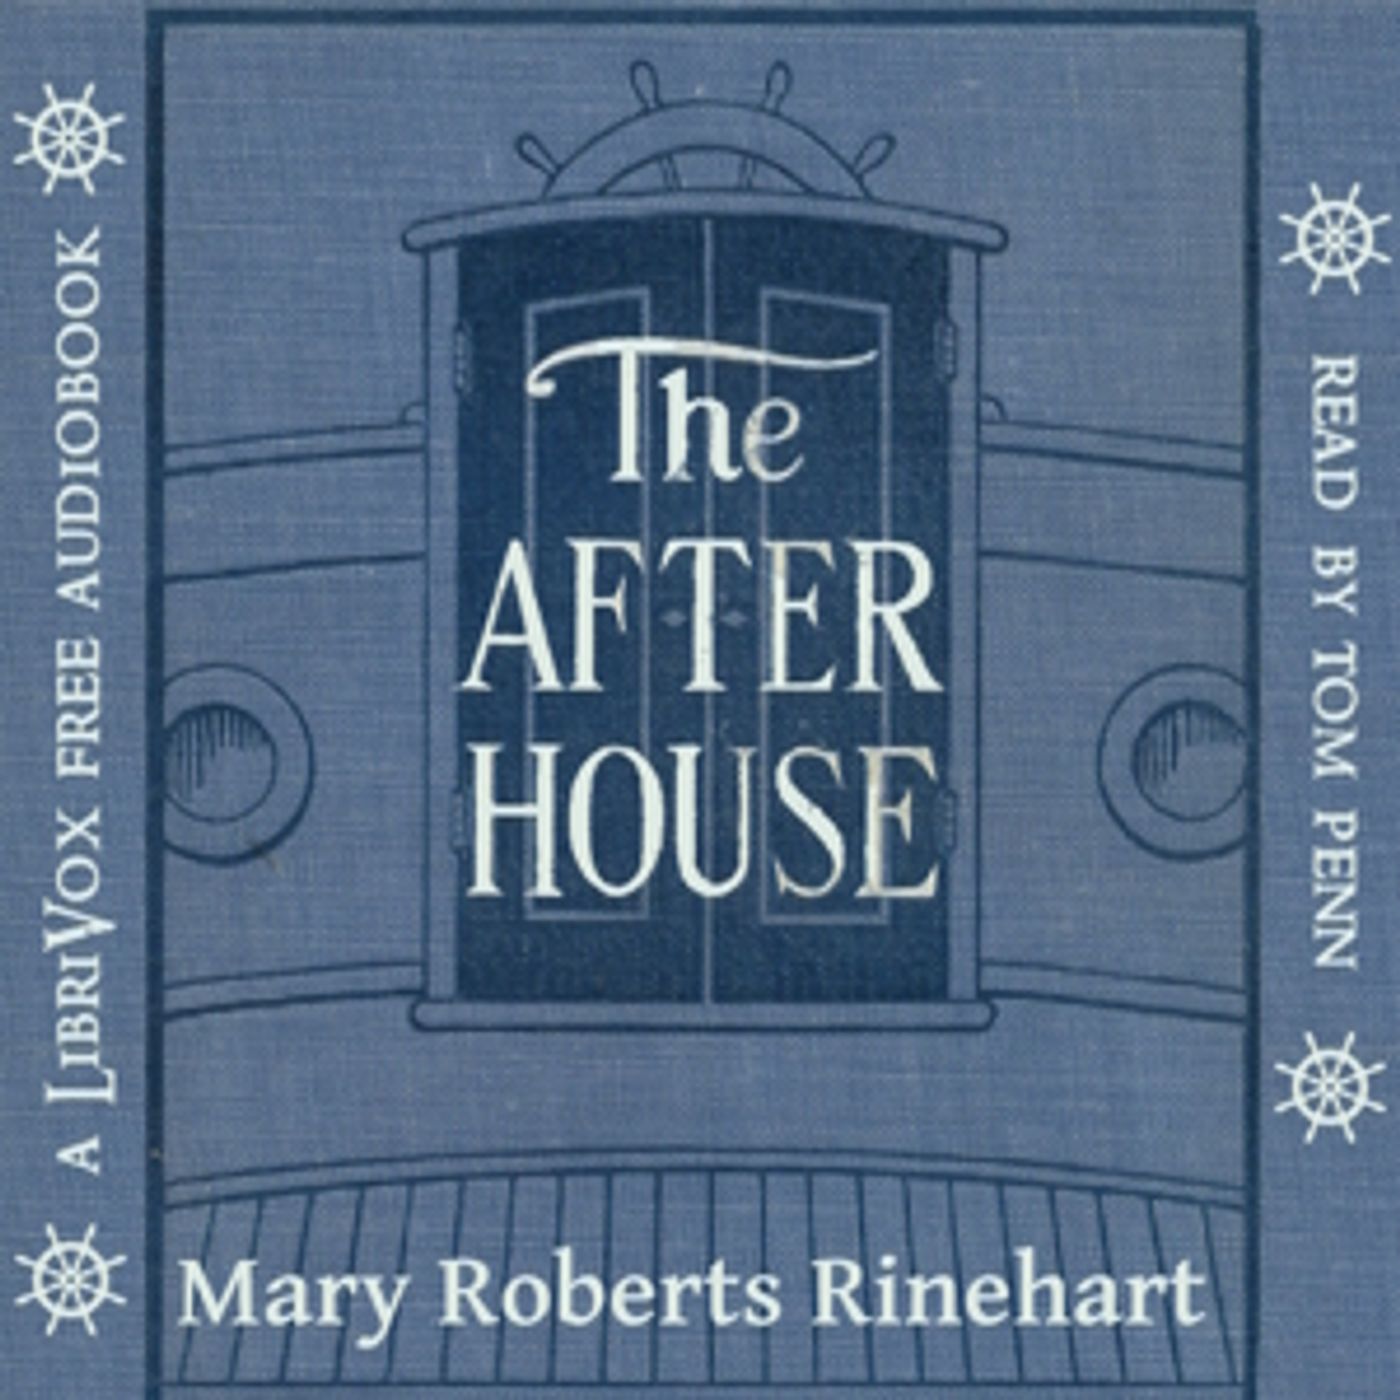 After House, The by Mary Roberts Rinehart (1876 – 1958)